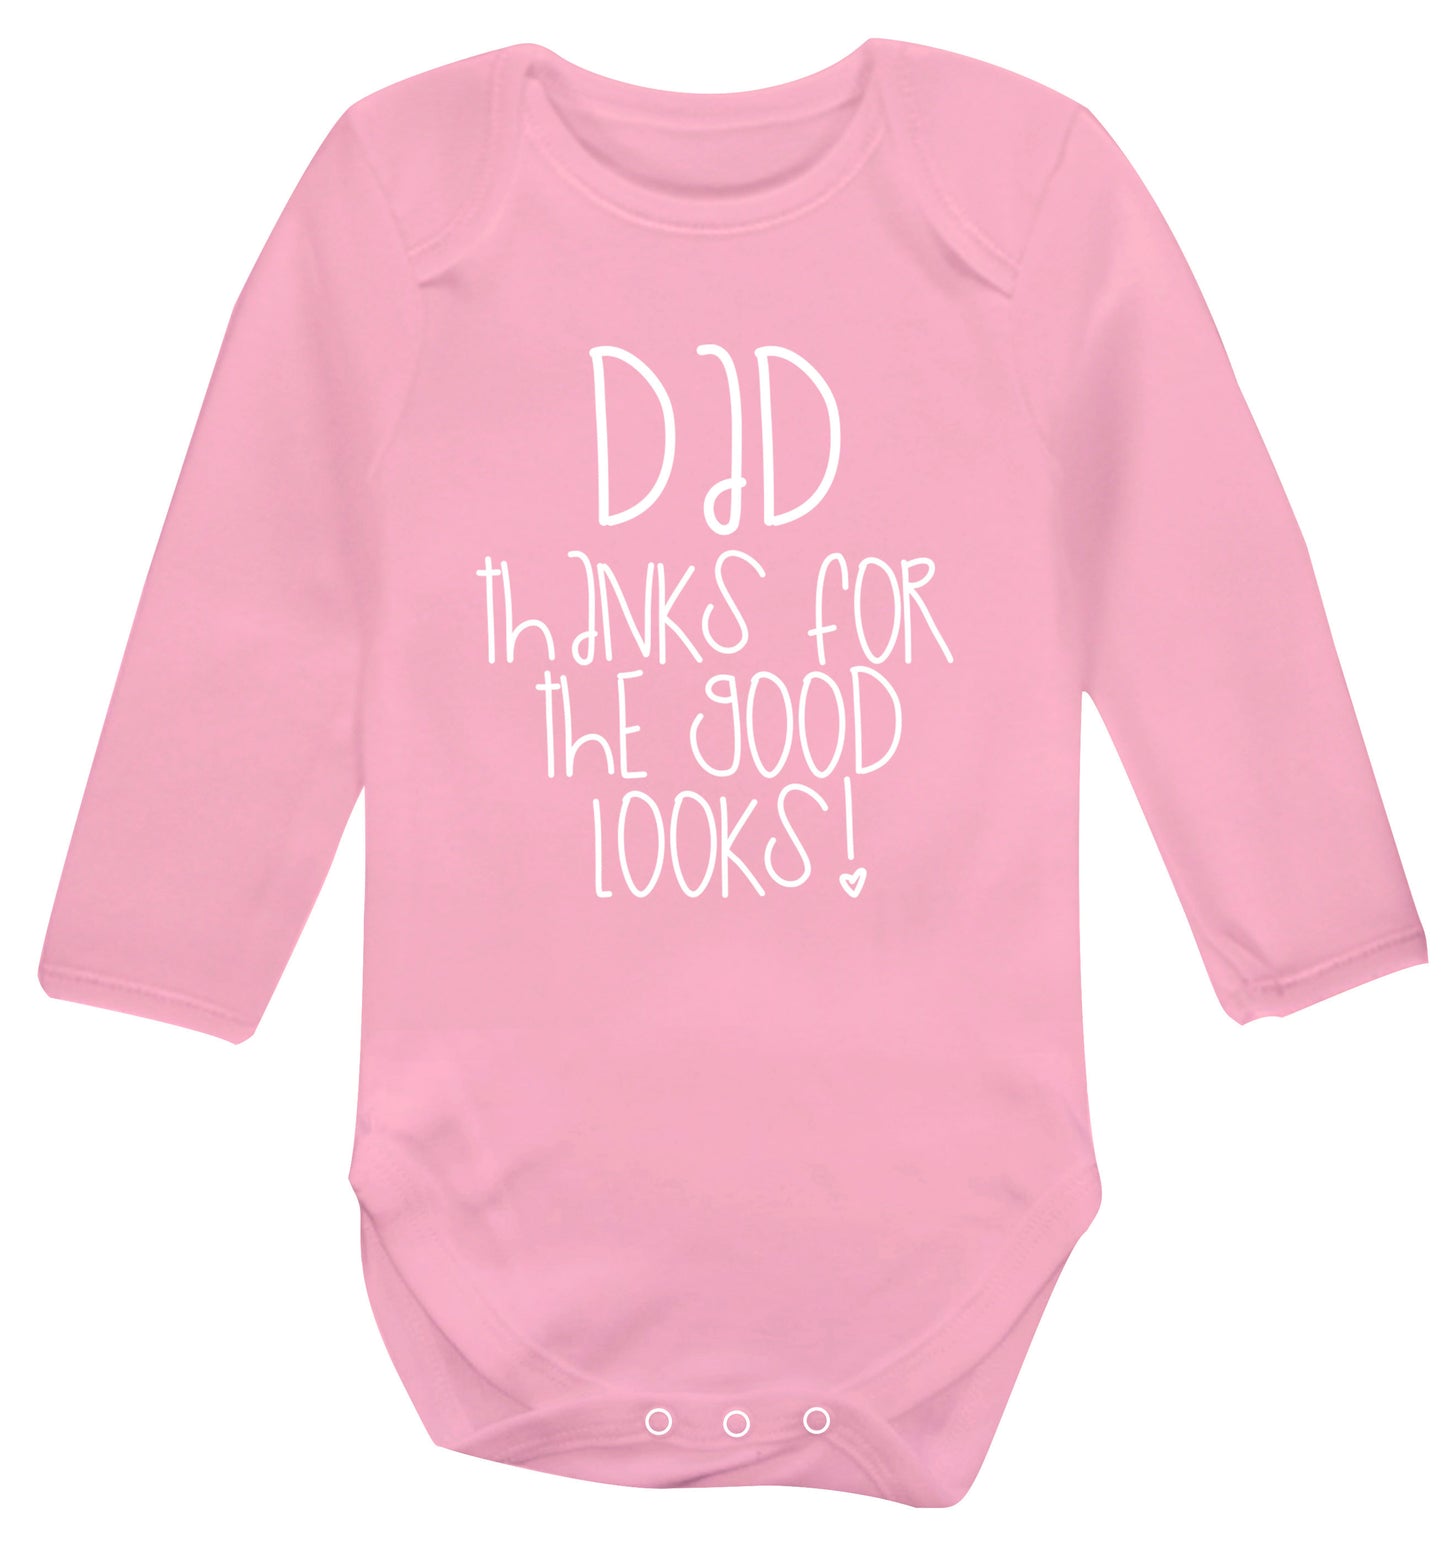 Dad thanks for the good looks Baby Vest long sleeved pale pink 6-12 months